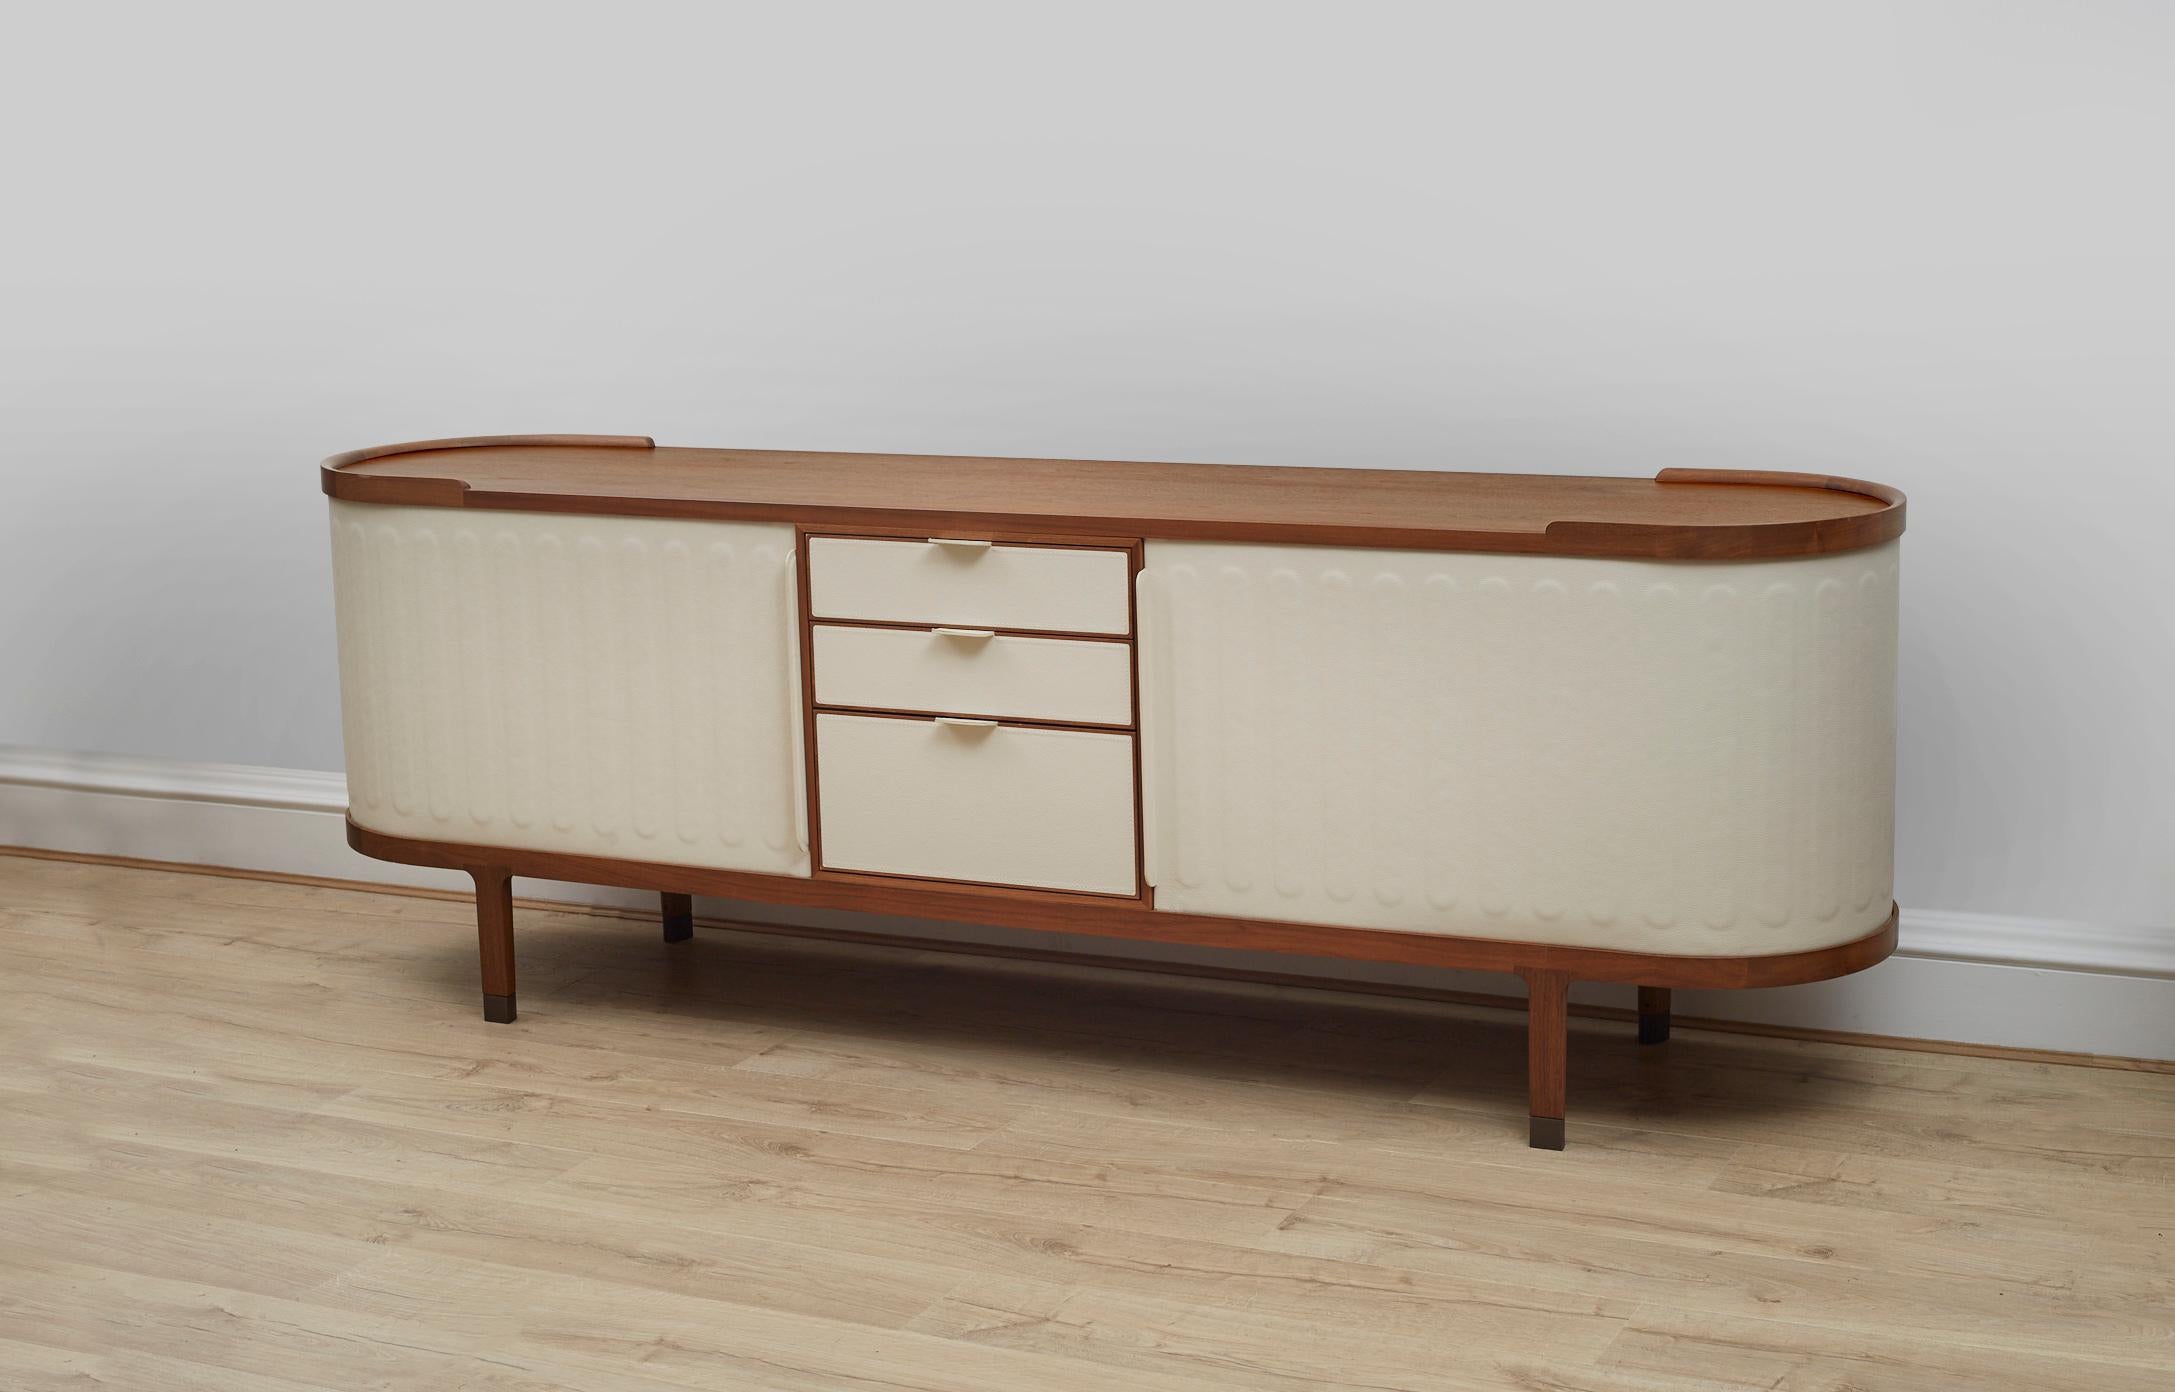 A Superb 'Dia' cabinet /sideboard designed by Chi Wing Lo for Giorgetti with sliding Cream coloured leather doors and a walnut canaletto wood frame, produced in 2012. 

It is composed of one chest of drawers, wood shelves and two adjustable height